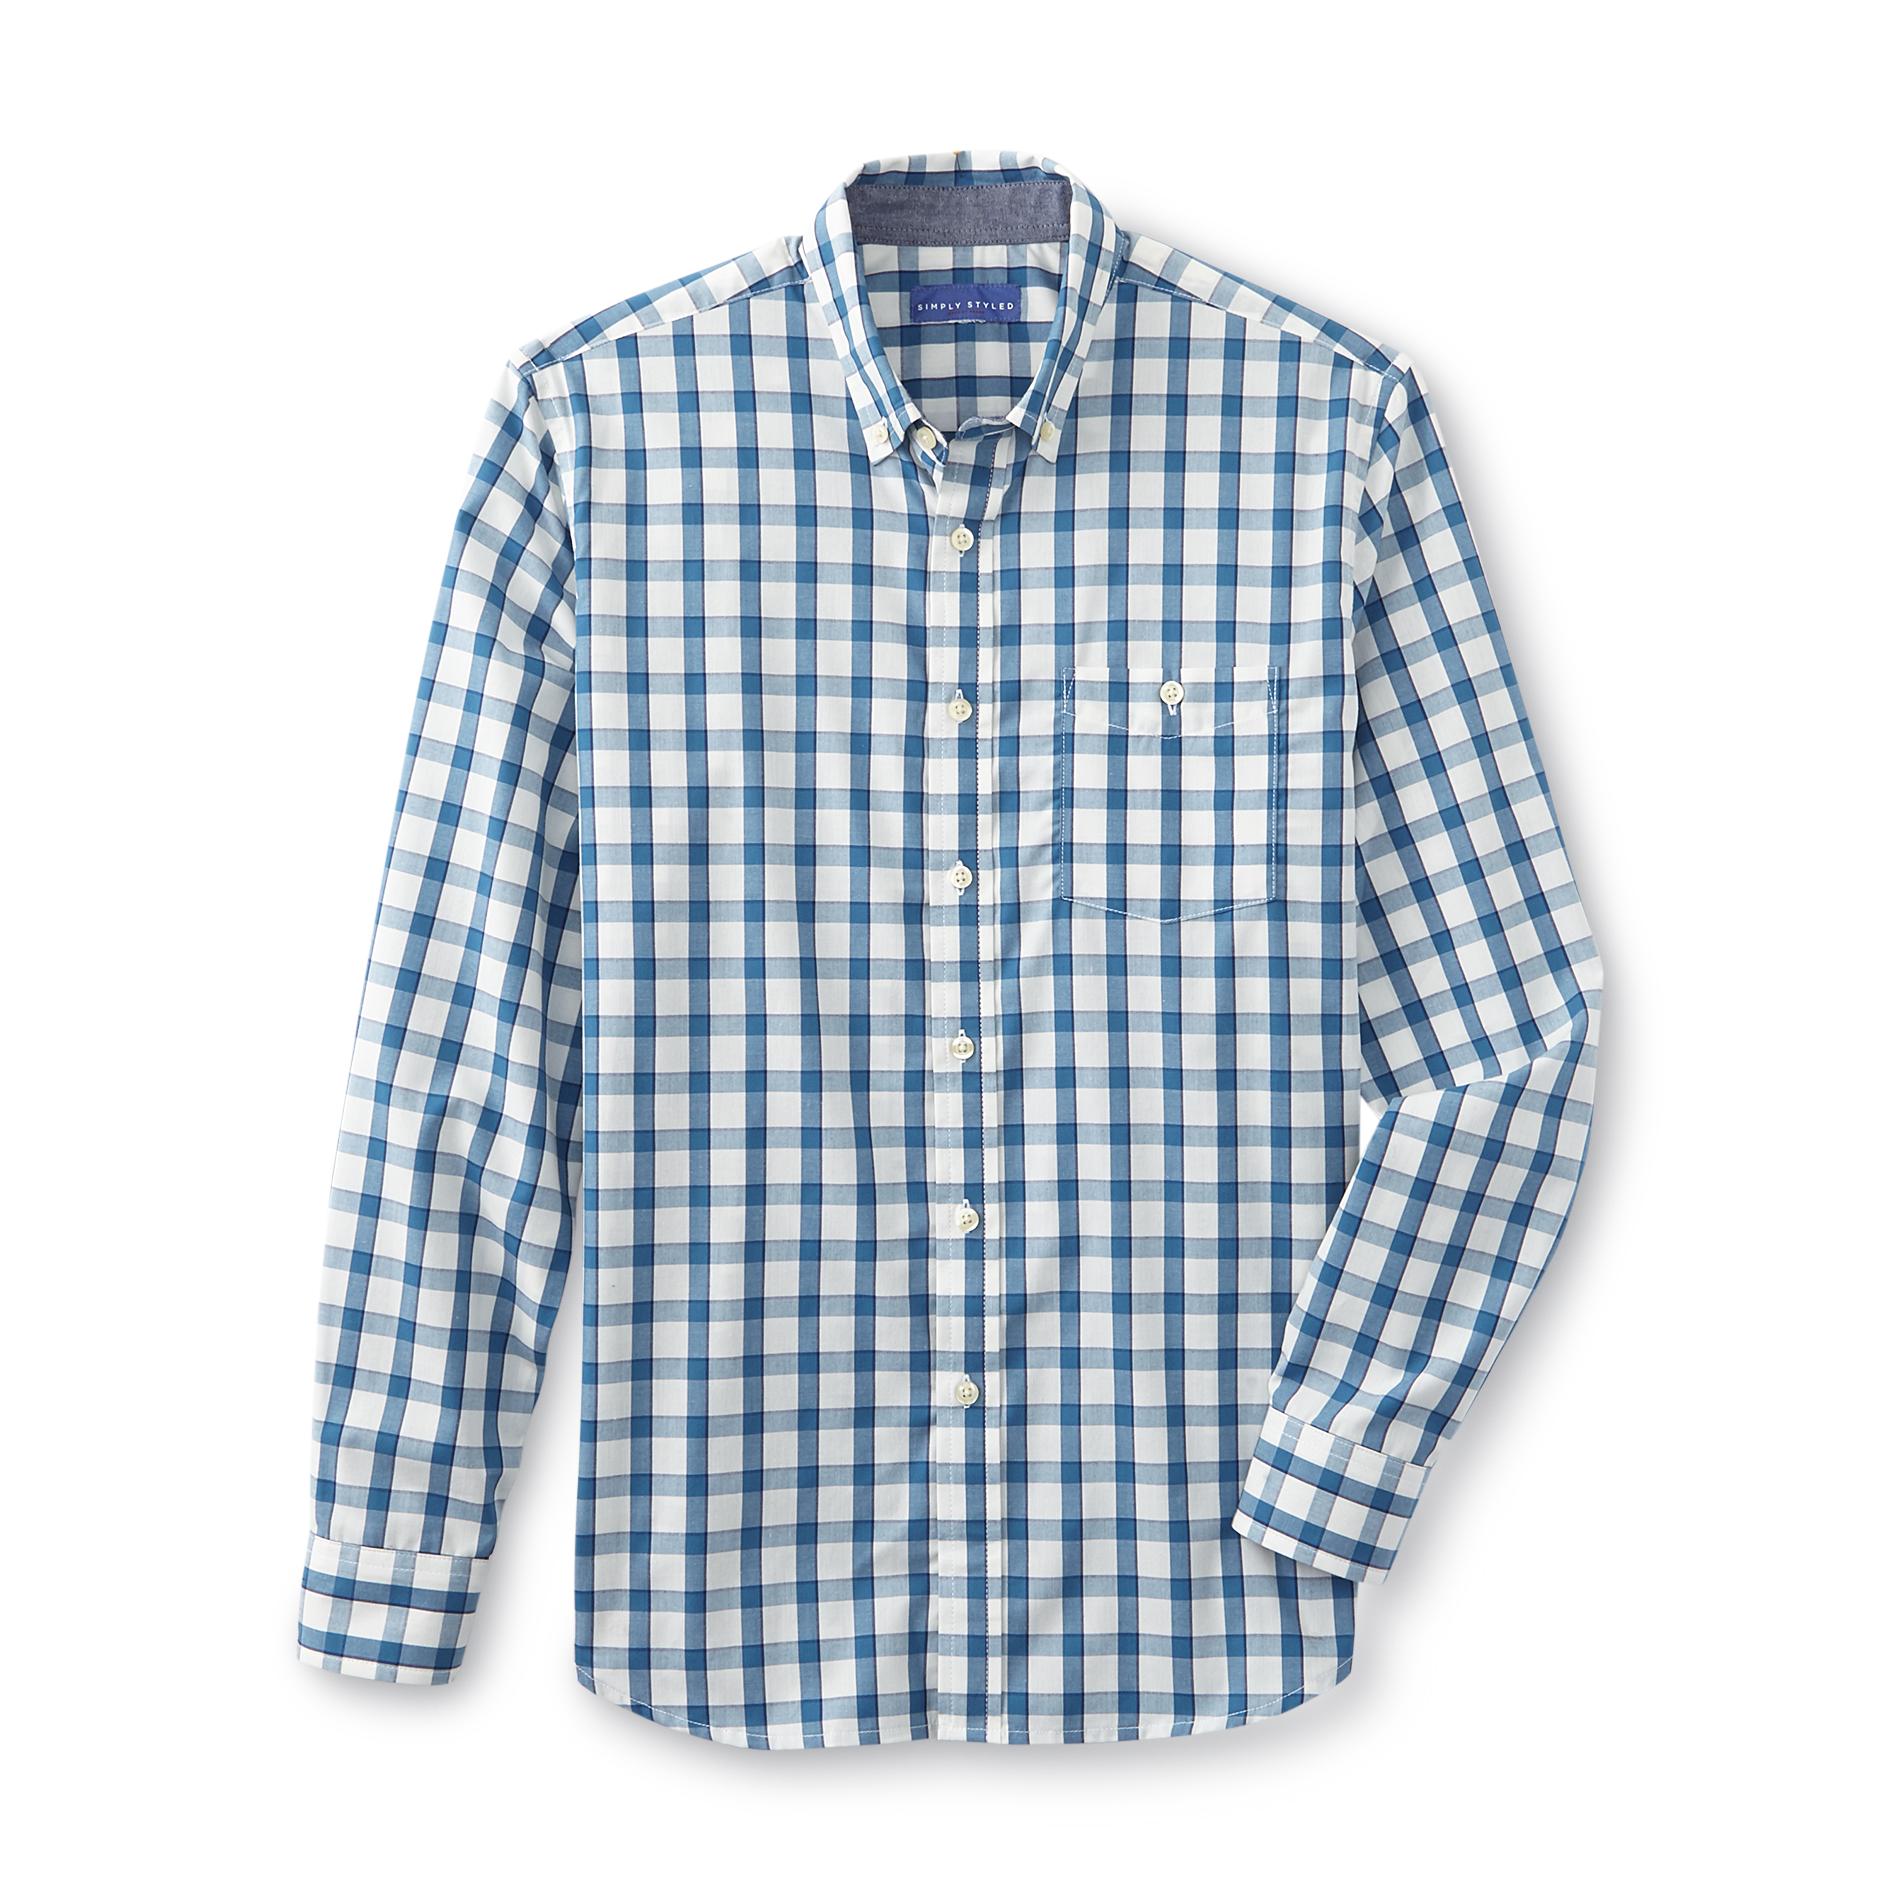 Simply Styled Men's Woven Shirt - Plaid